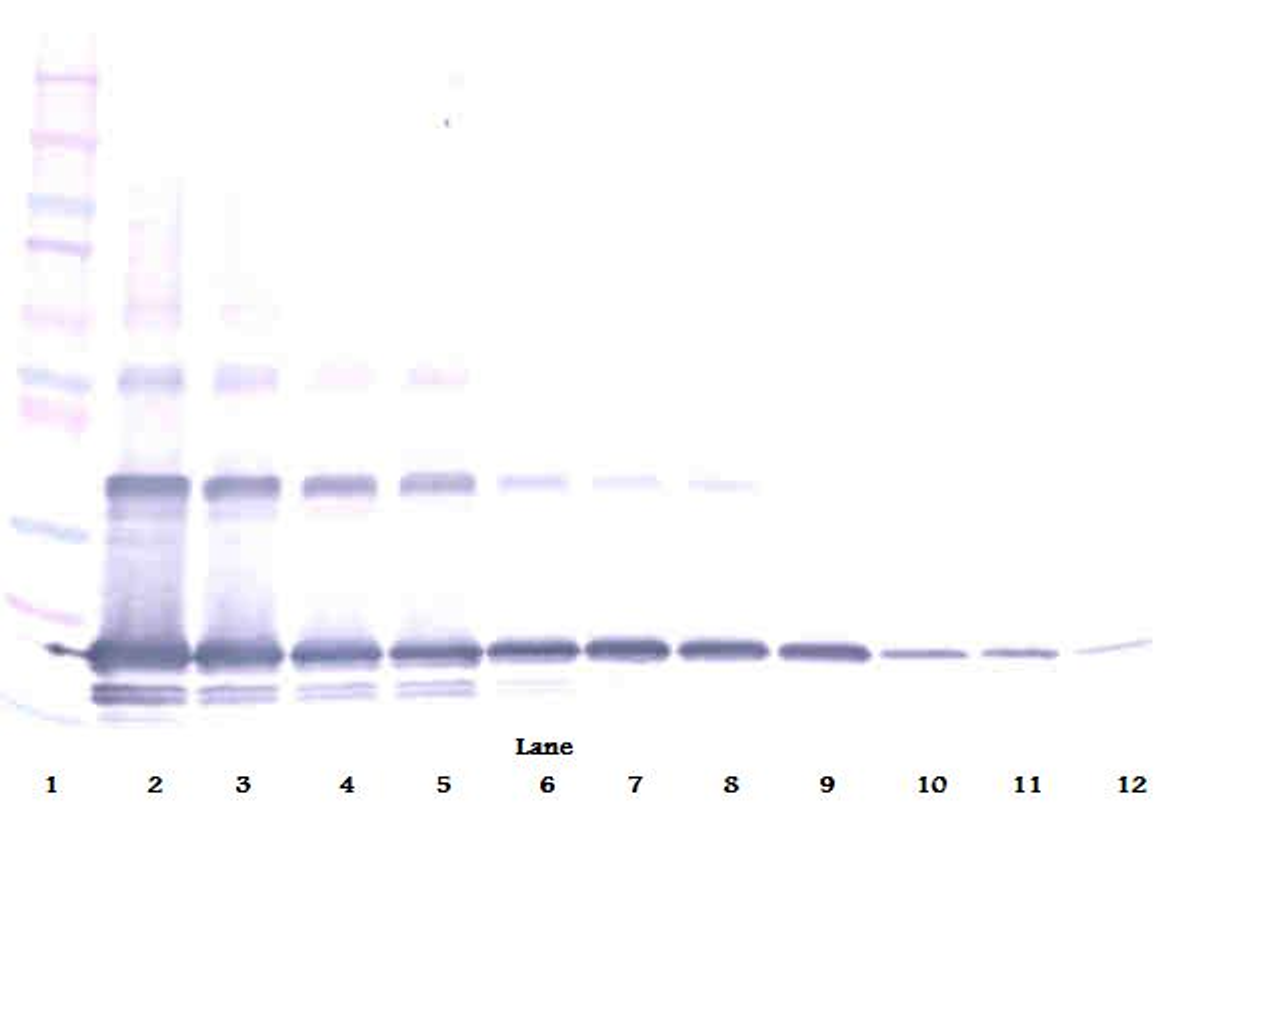 To detect hsRANKL by Western Blot analysis this antibody can be used at a concentration of 0.1-0.2 ug/ml. Used in conjunction with compatible secondary reagents the detection limit for recombinant hsRANKL is 1.5-3.0 ng/lane, under either reducing or non-reducing conditions.